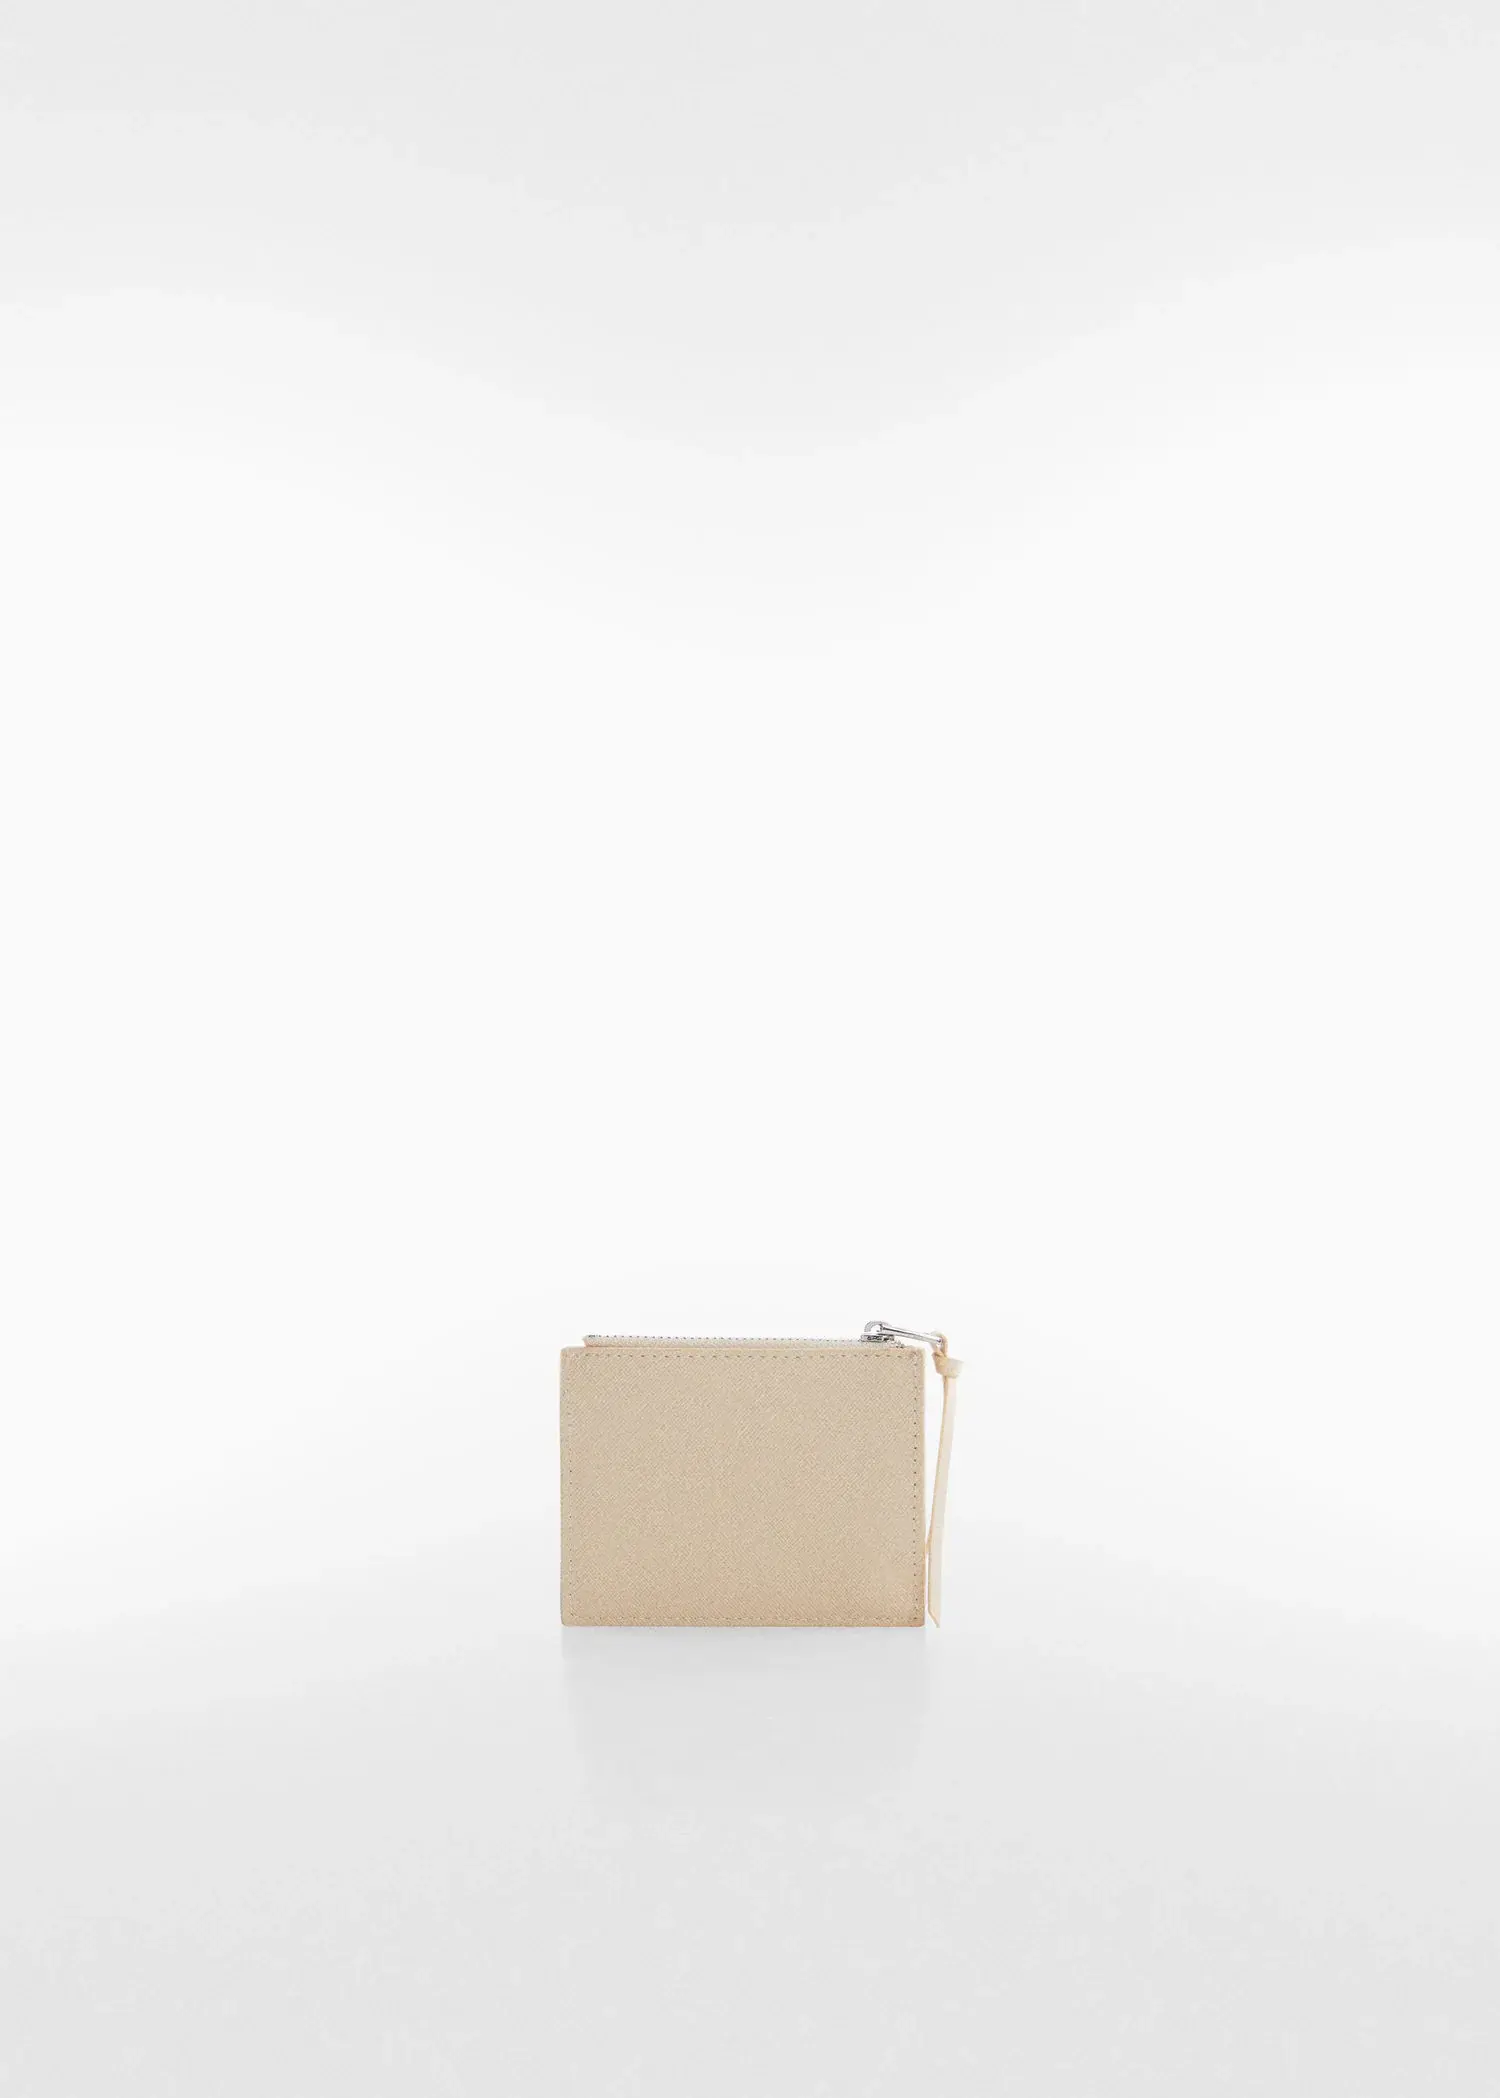 Mango Saffiano-effect cardholder. an open box sitting on top of a white table. 